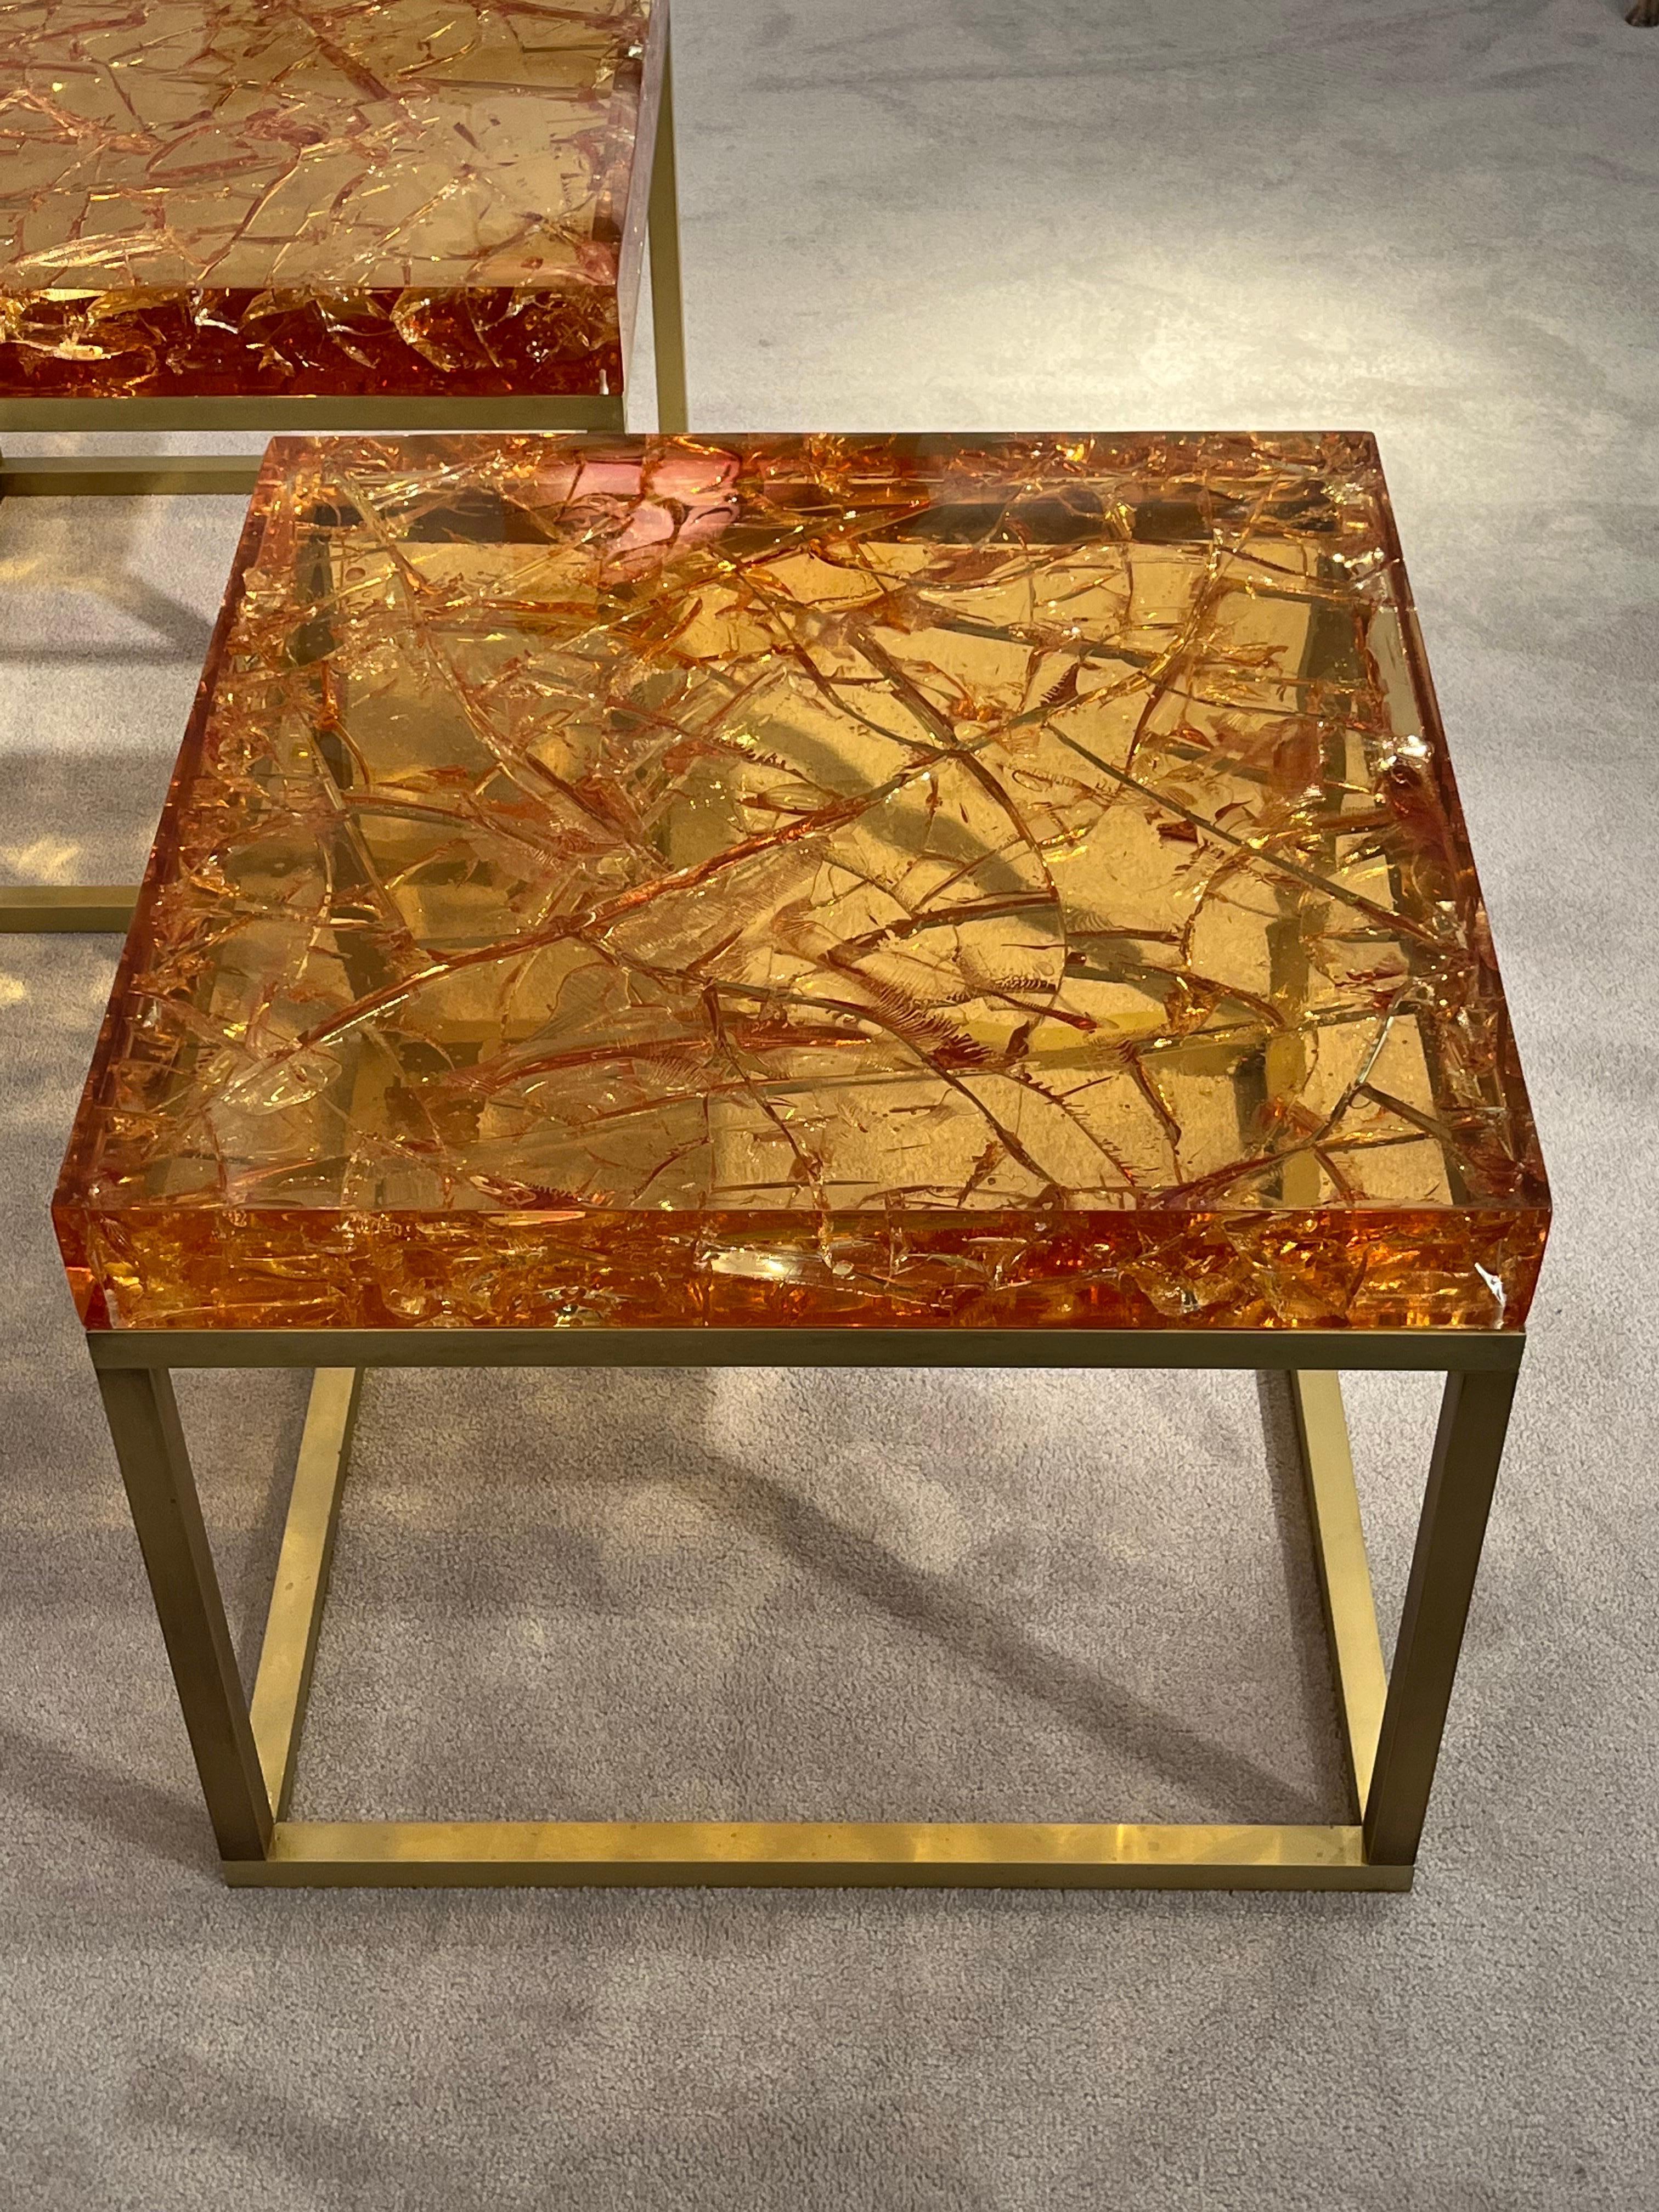 Pair Of Fractal Resin Tables By Giraudon In Excellent Condition For Sale In Saint-Ouen, FR